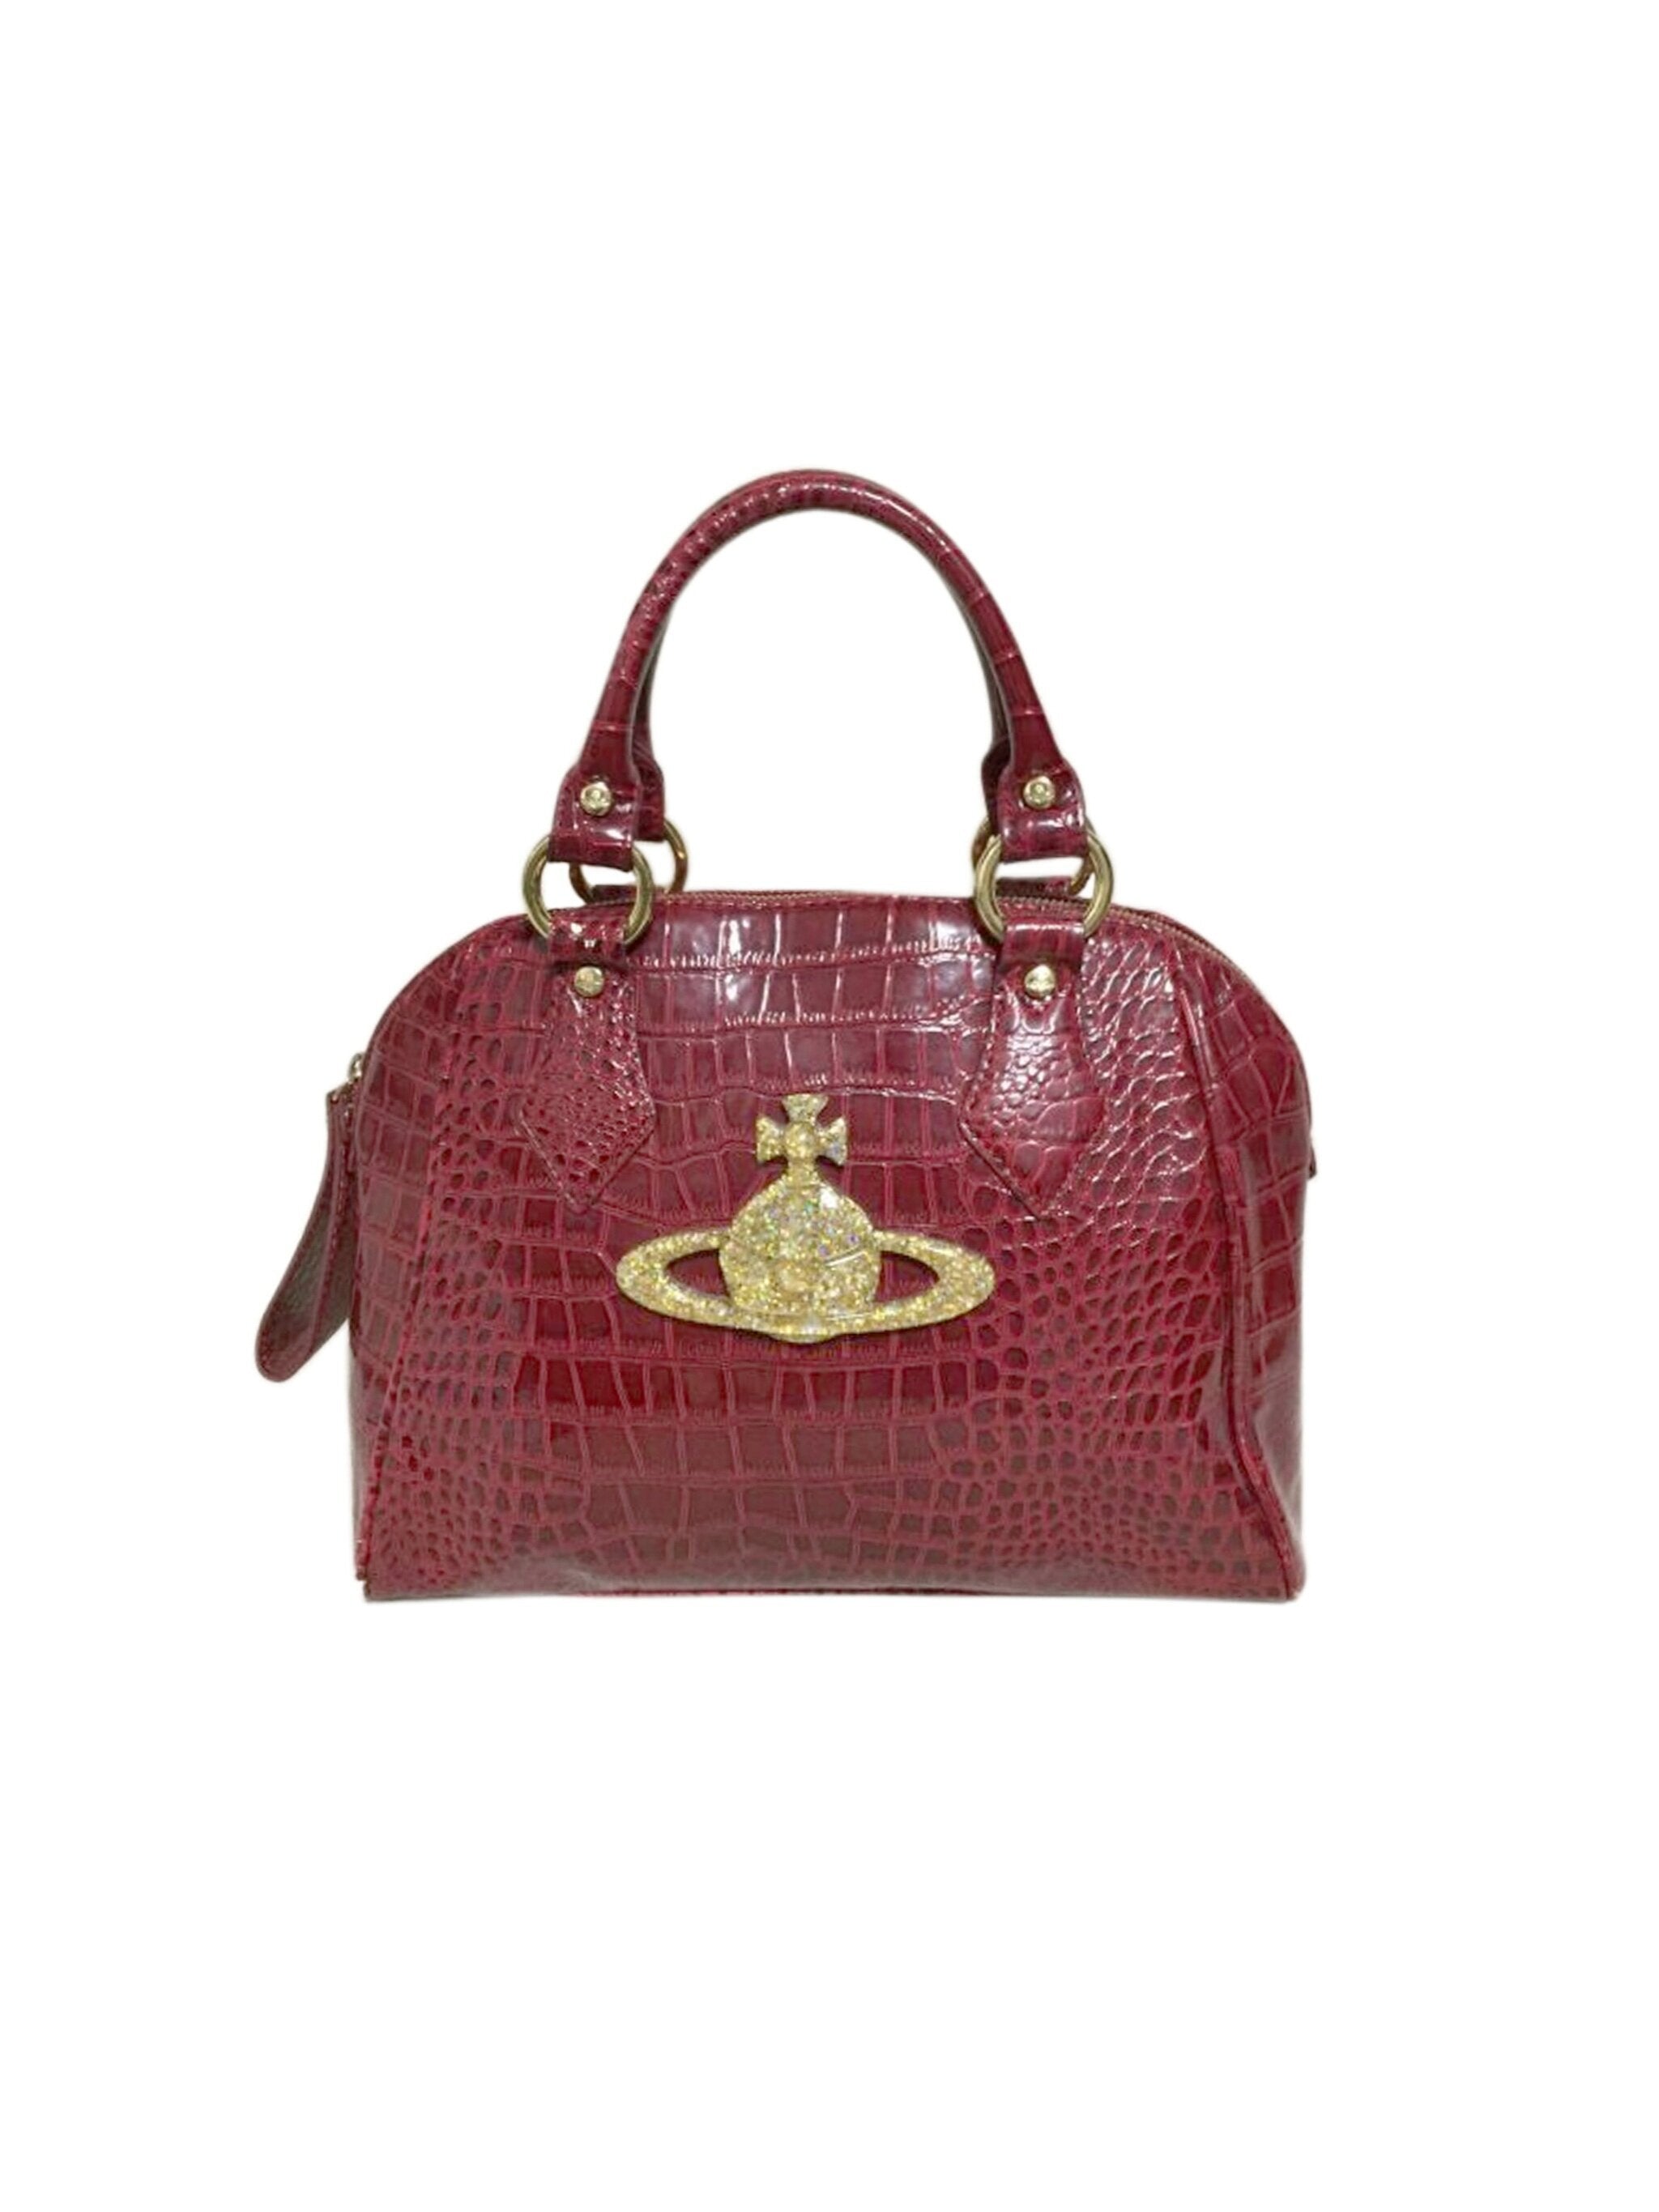 Vivienne Westwood 2000s Pink Heart Charm Tote · INTO